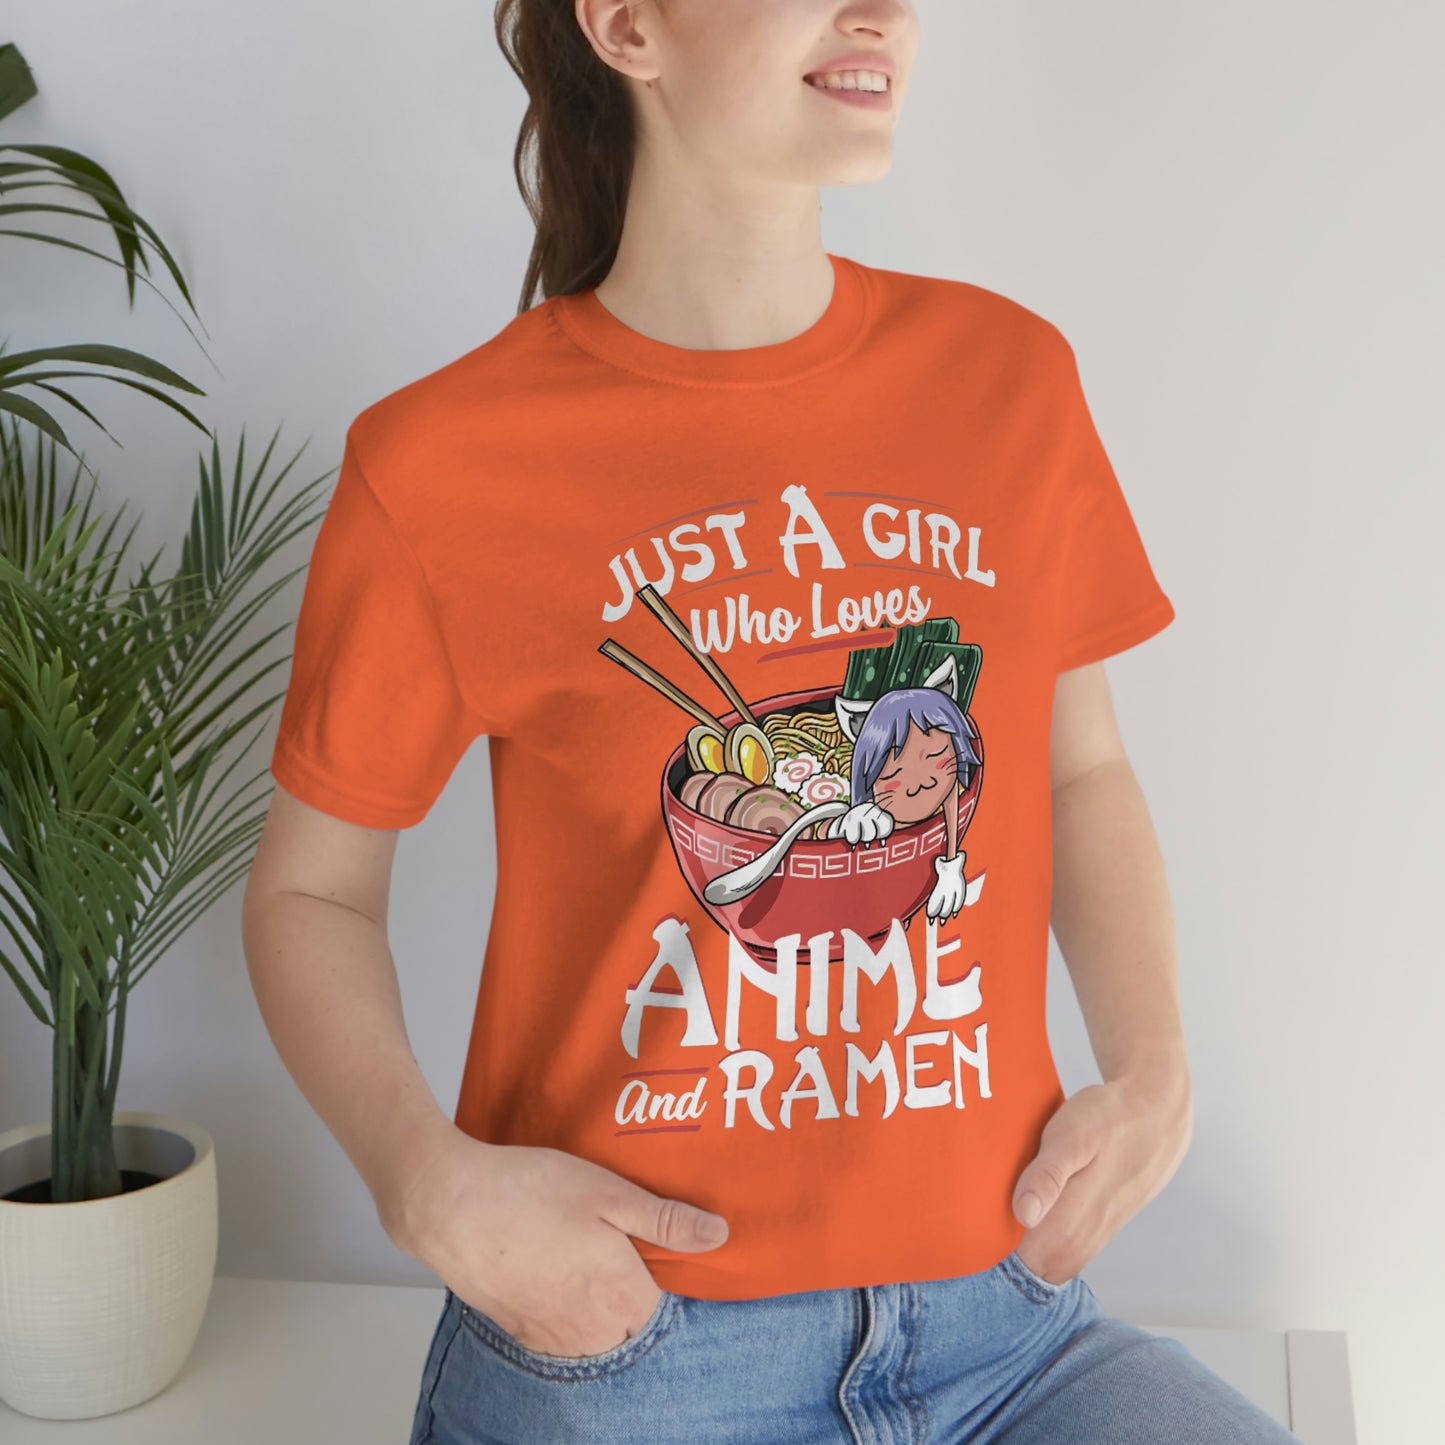 Just a girl who loves anime and ramen